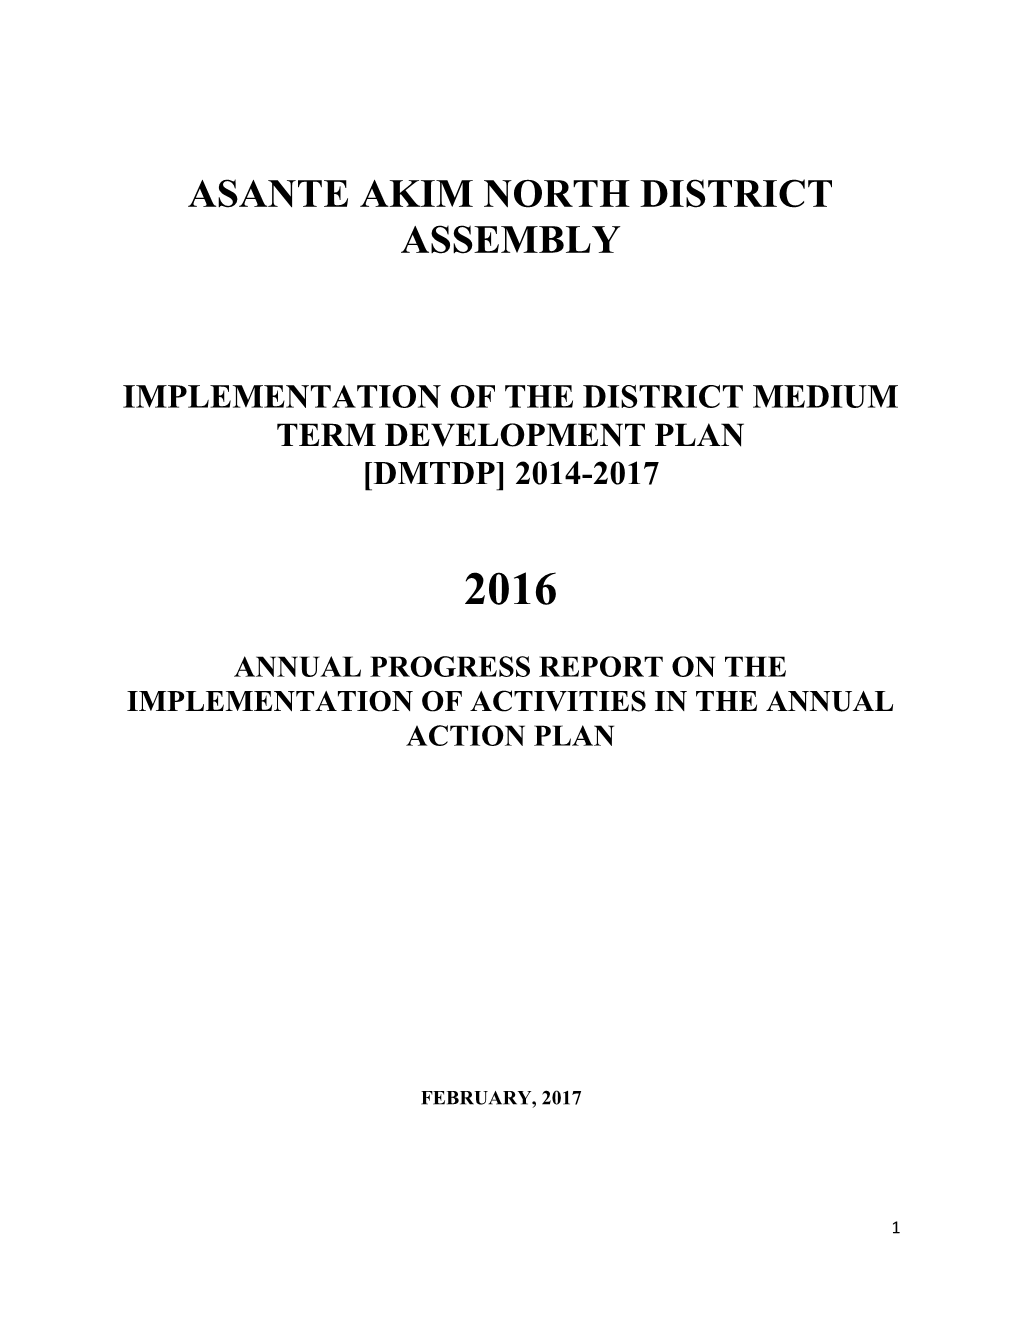 Asante Akim North District Assembly